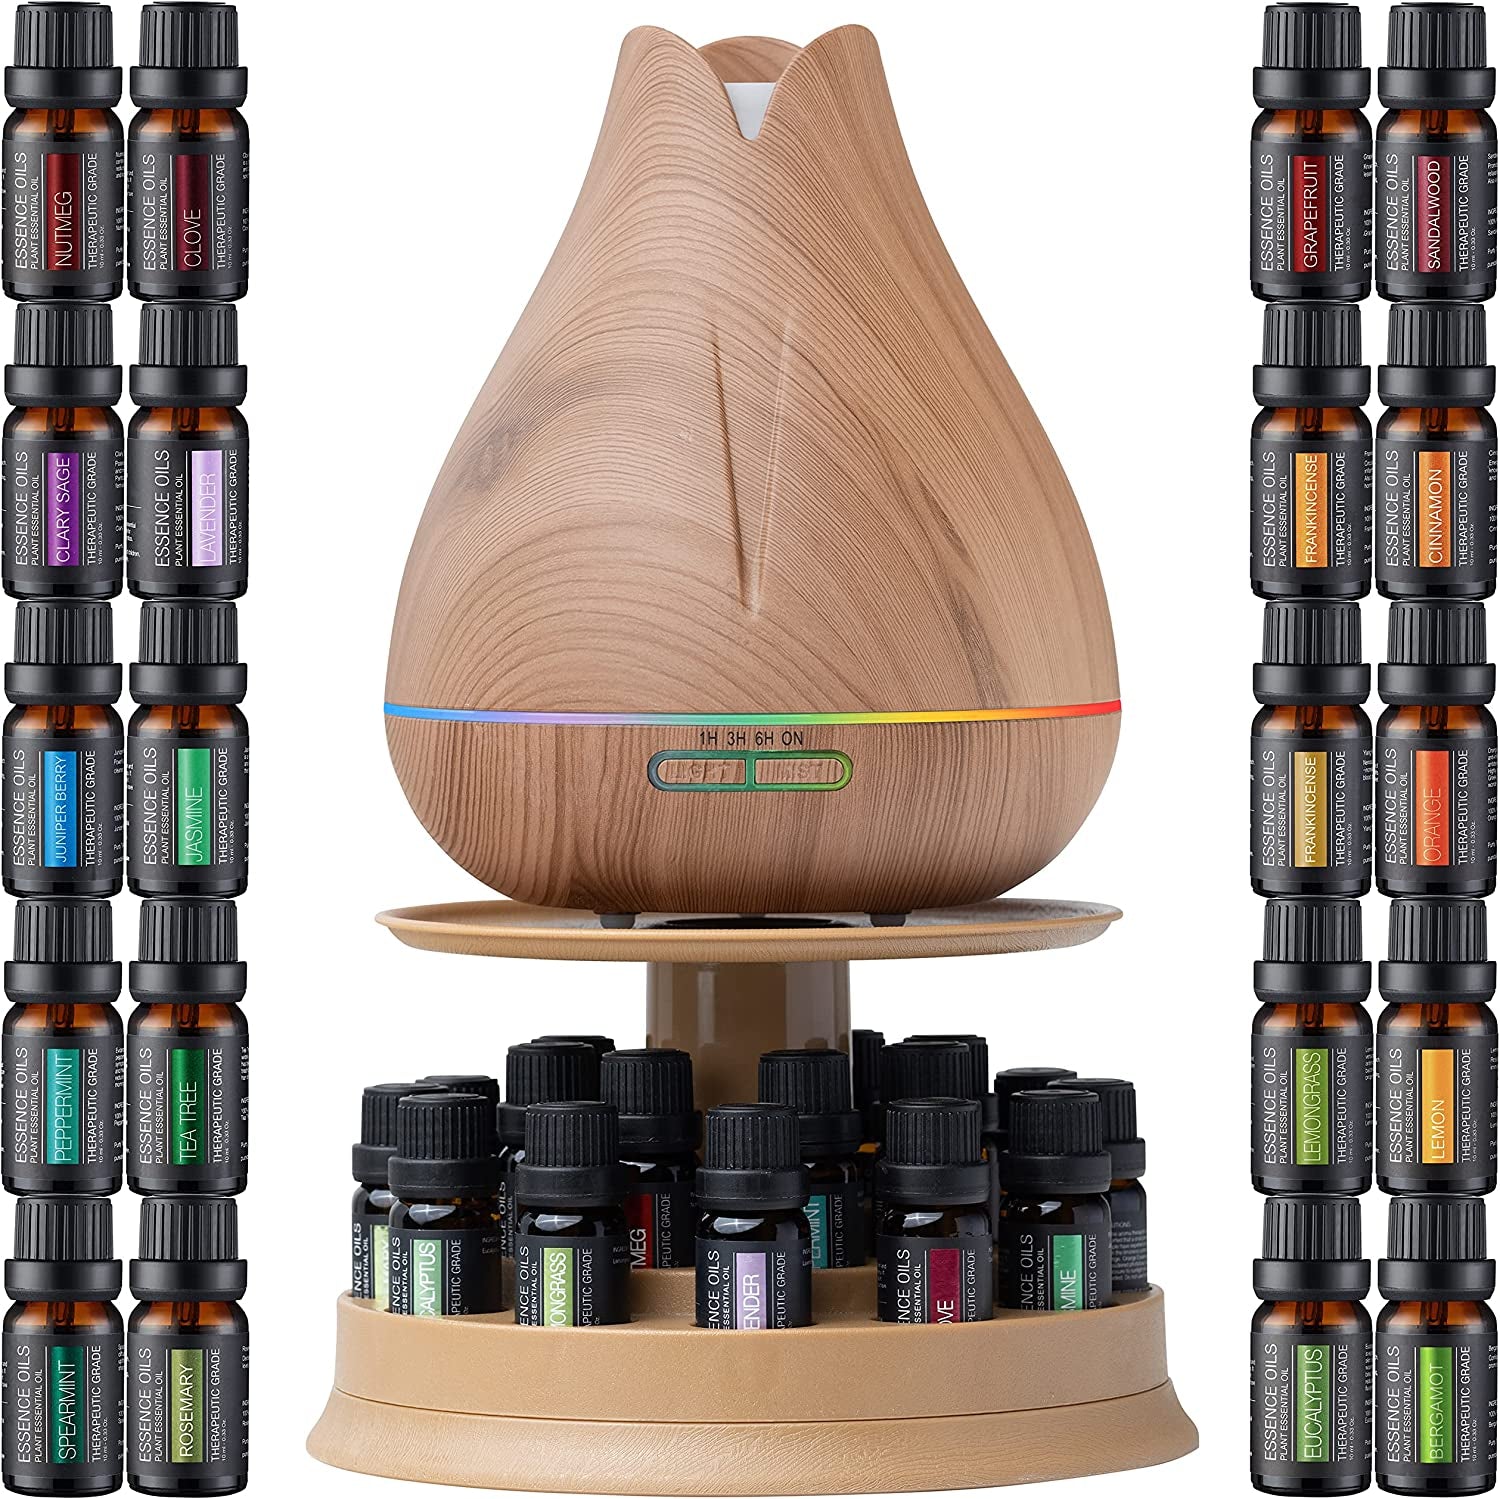 Aromatherapy Essential Oil Diffuser Gift Set - 400Ml Ultrasonic Diffuser with 20 Essential Plant Oils - 4 Timer & 7 Ambient Light Settings - Therapeutic Grade Essential Oils